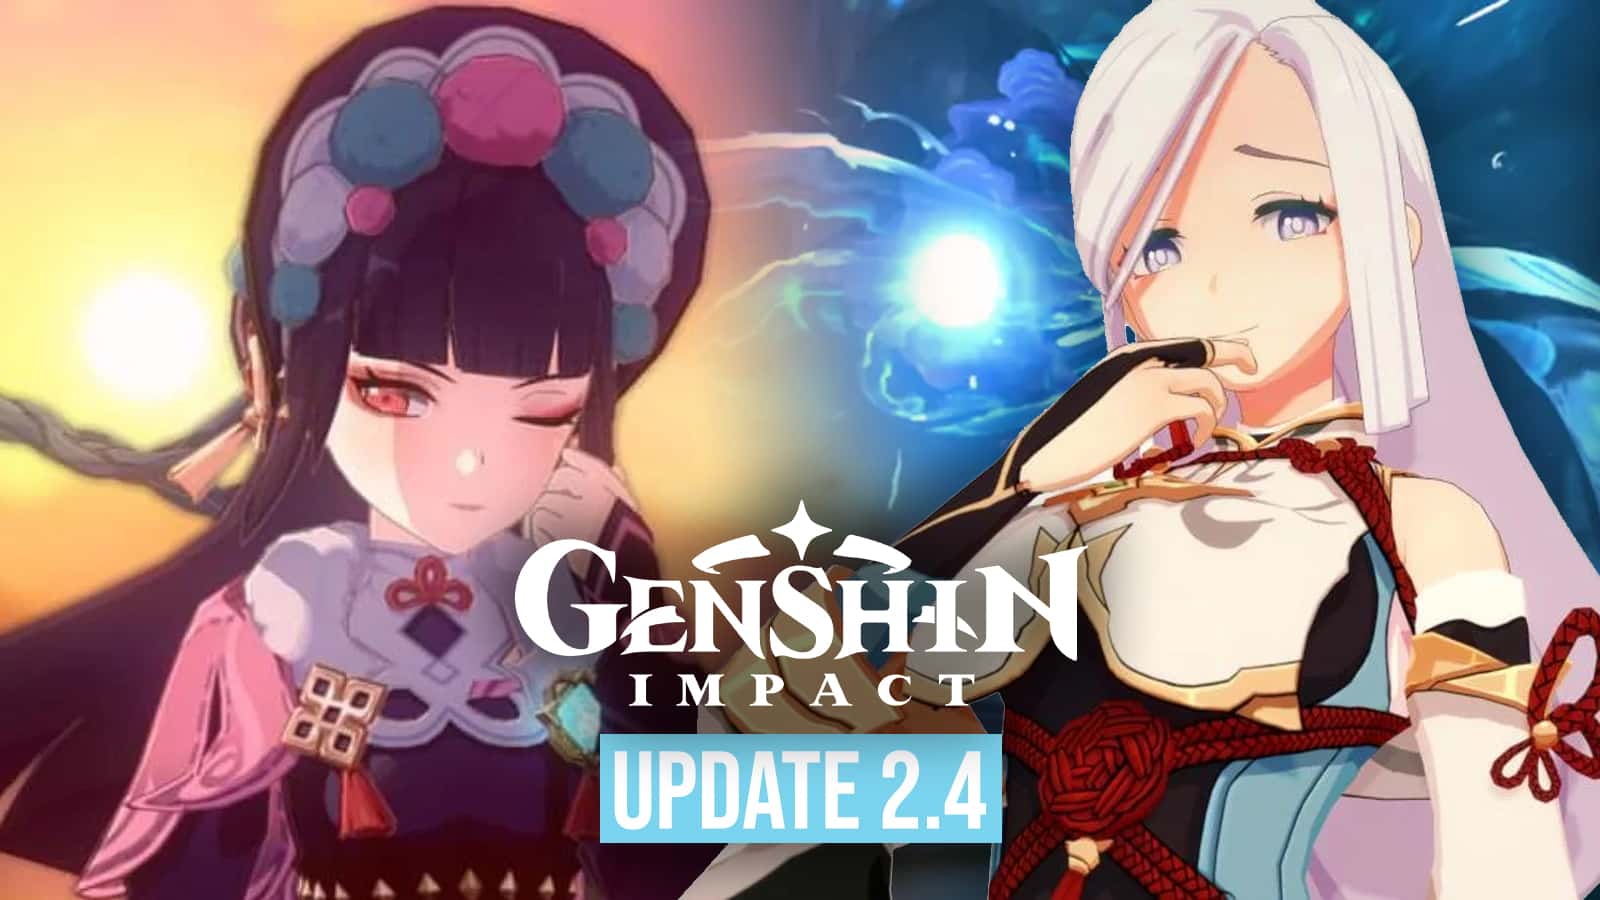 List of Genshin Impact characters to be released in 2023 as per leaks